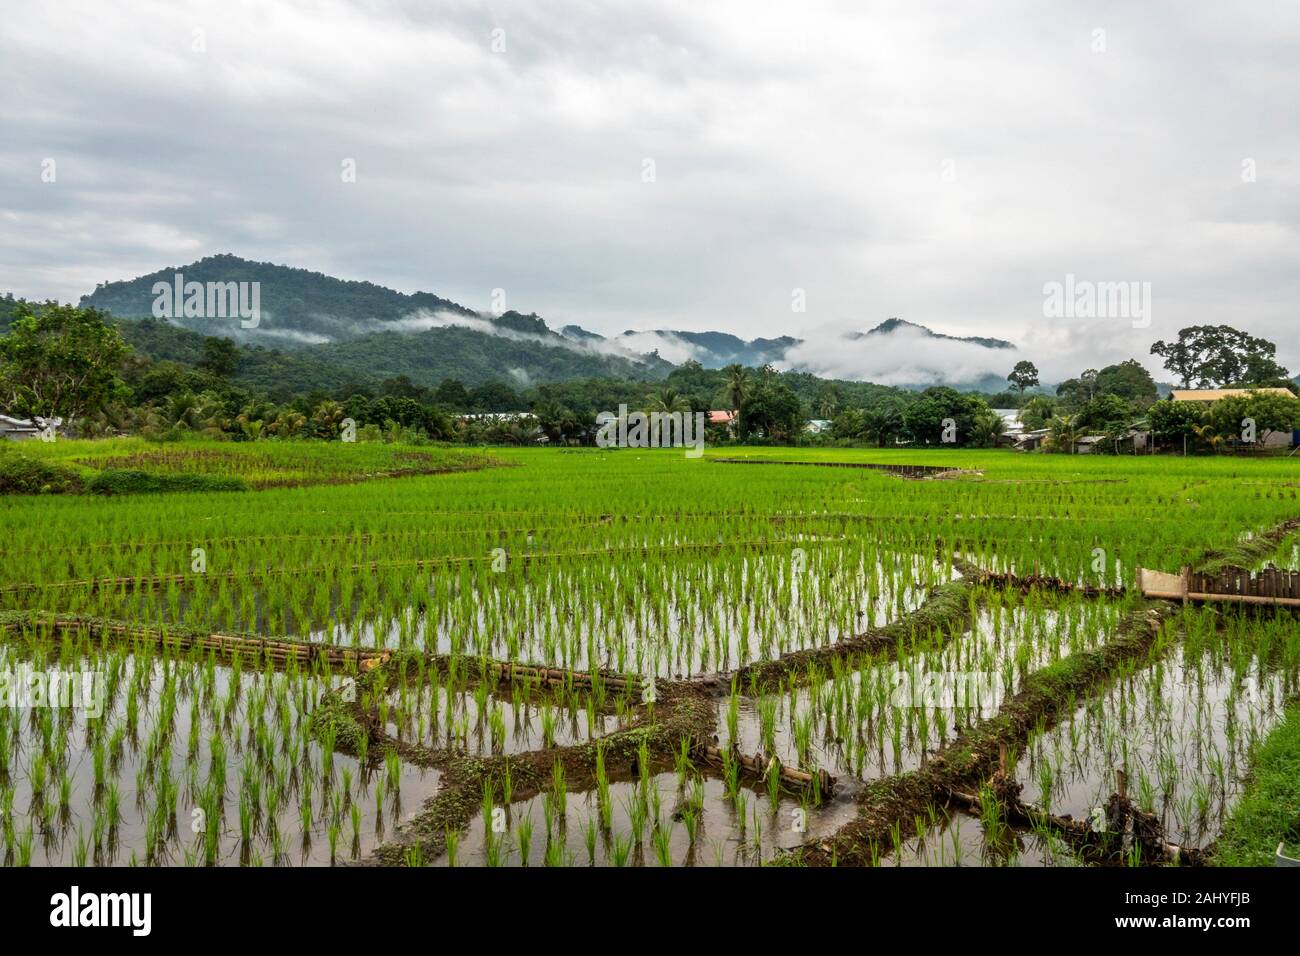 Rice Paddy Field In Malaysia High Resolution Stock Photography And Images Alamy